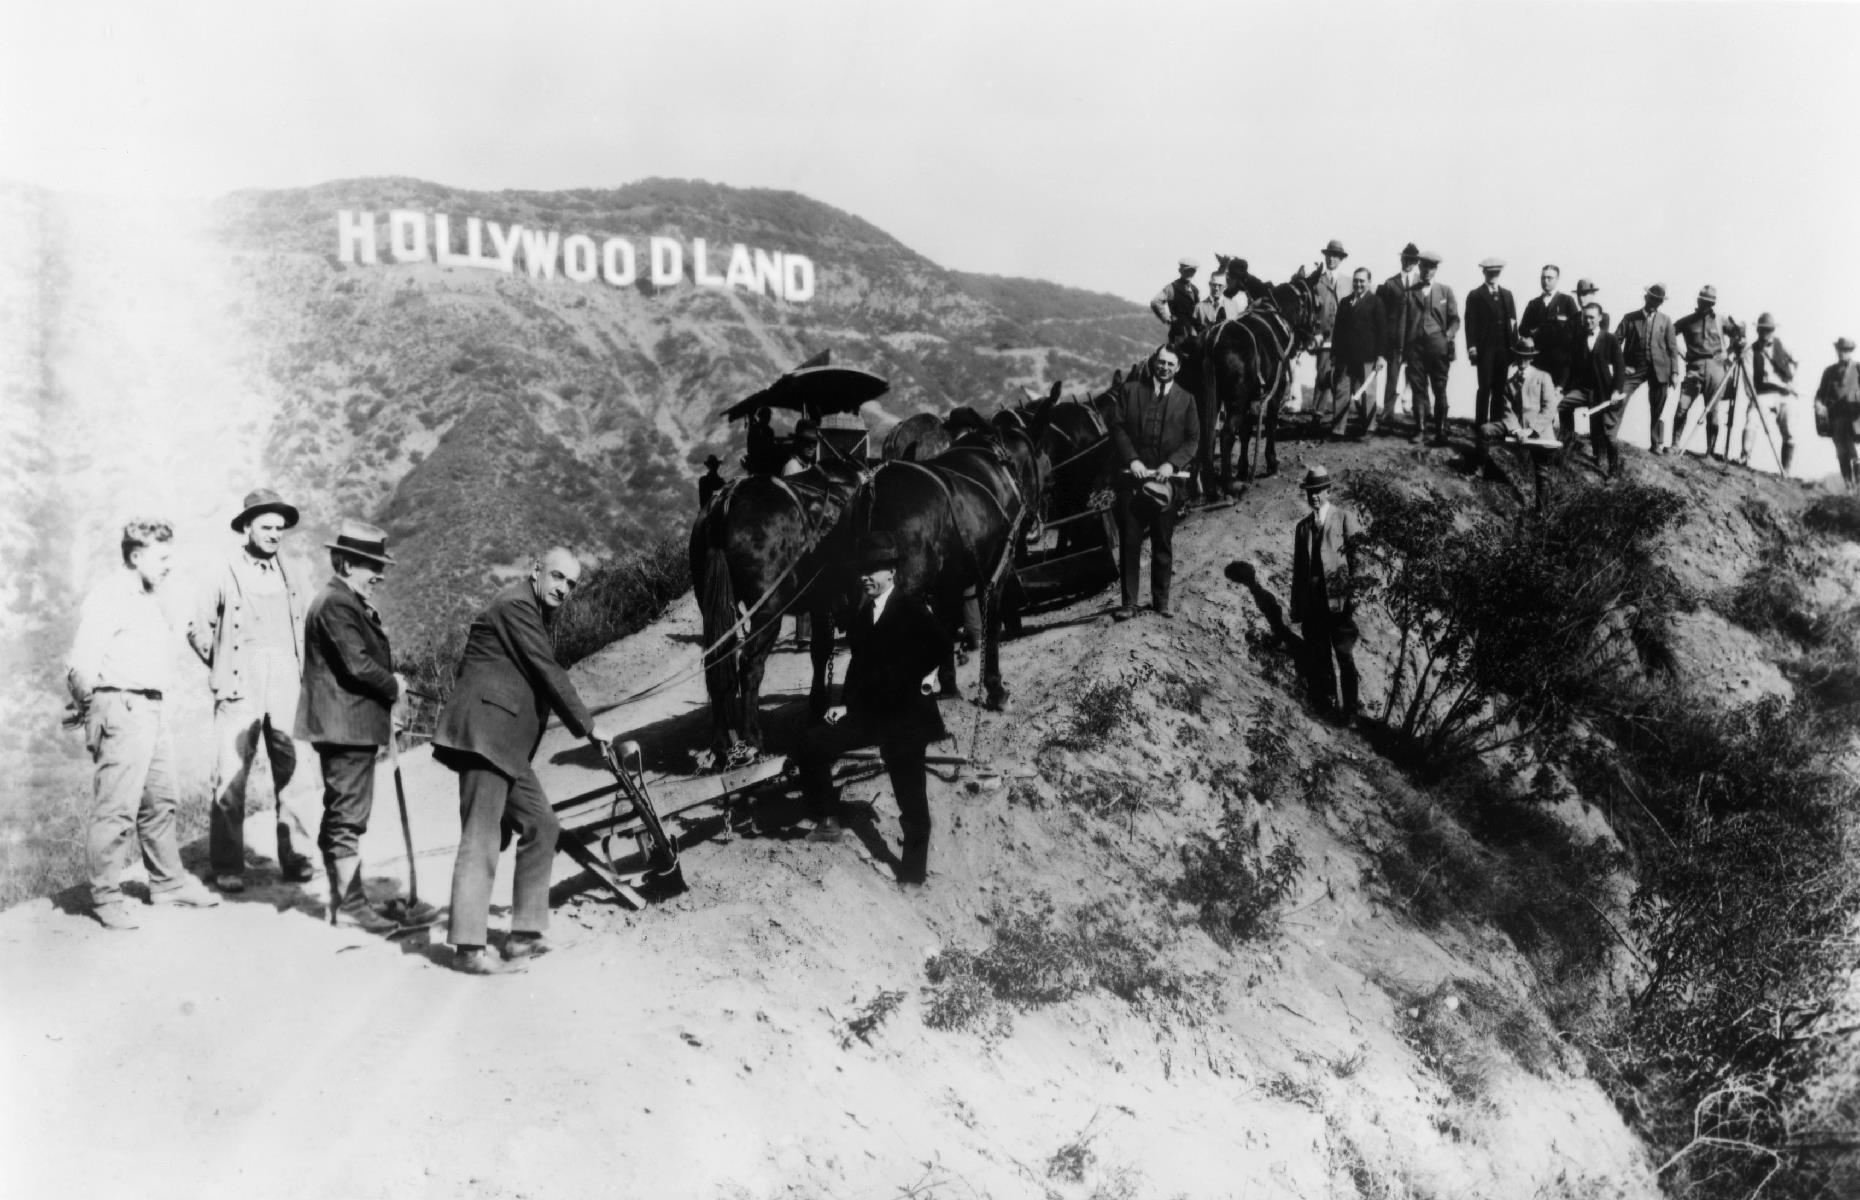 <p>You might be surprised to learn that the Hollywood sign that towers above Los Angeles once read “Hollywoodland”, as shown in this image from 1925, in which a group of surveyors pose underneath it. However in 1949, it was decided that the sign – which was originally built as a temporary advertisement for a housing development – should drop the “land”, in order to refer to the whole area. Now, the famous backdrop is captured on many tourists' cameras.</p>